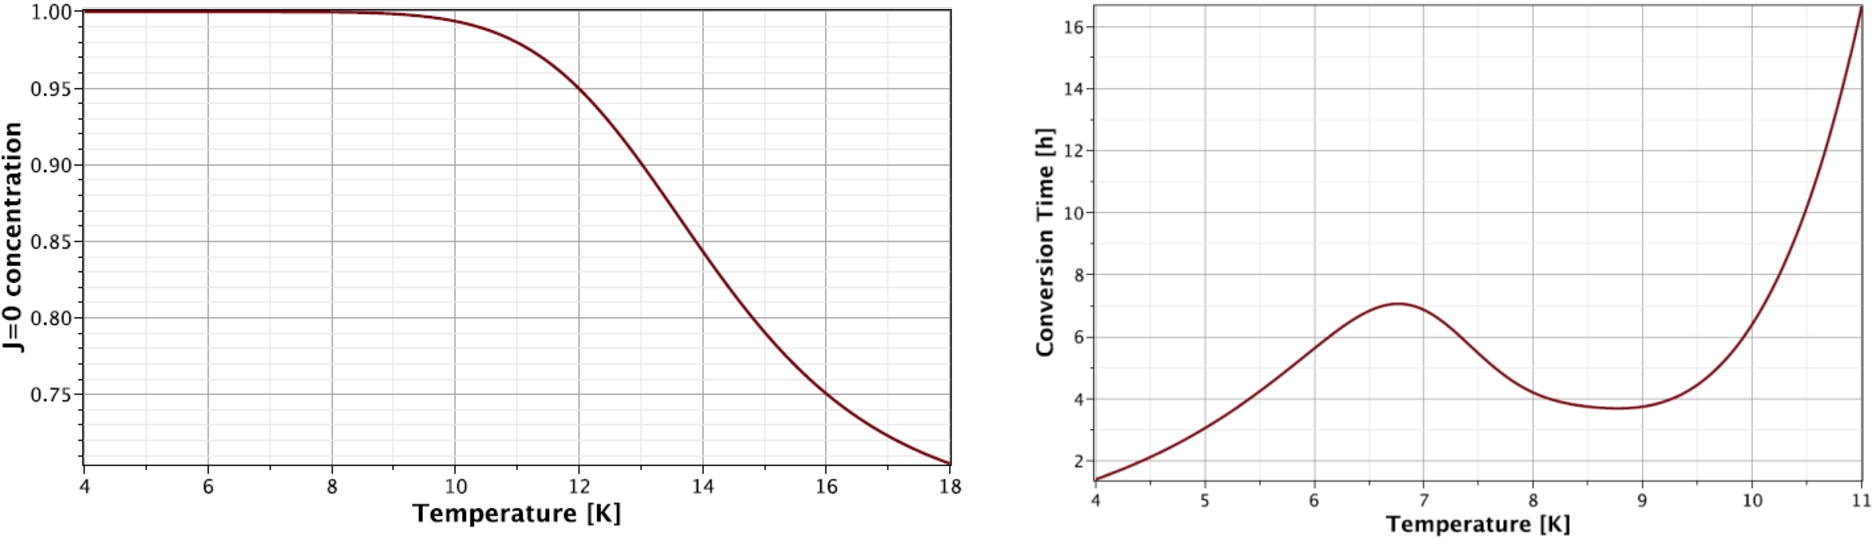 Left: the J=0 concentration for the t→∞ case in the FRM II UCN source depending on the temperature. Up to 9 K the deuterium will be completely in its ortho state. At higher temperatures the ortho concentrations drop rapidly towards the high temperature equilibrium due to the recombination of deuterium atoms. Right: calculated conversion time constant for a deuterium crystal under irradiation with a dissociation rate of 2.84·10−6 s−1 as expected for the FRM II UCN source. Both figures from [69].